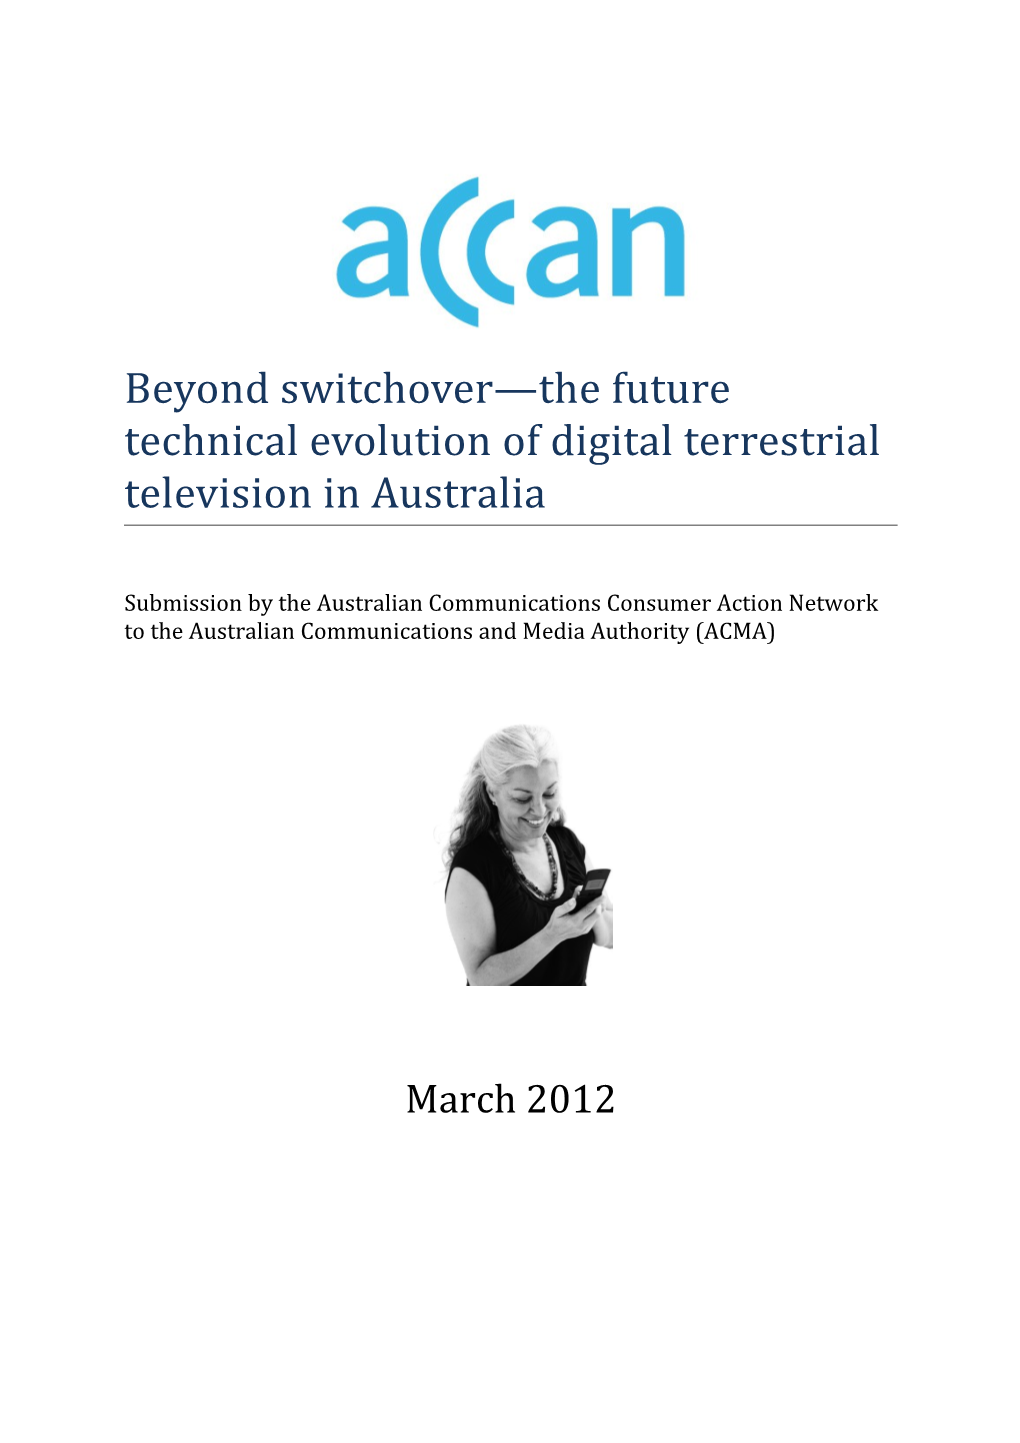 Beyond Switchover the Future Technical Evolution of Digital Terrestrial Television in Australia